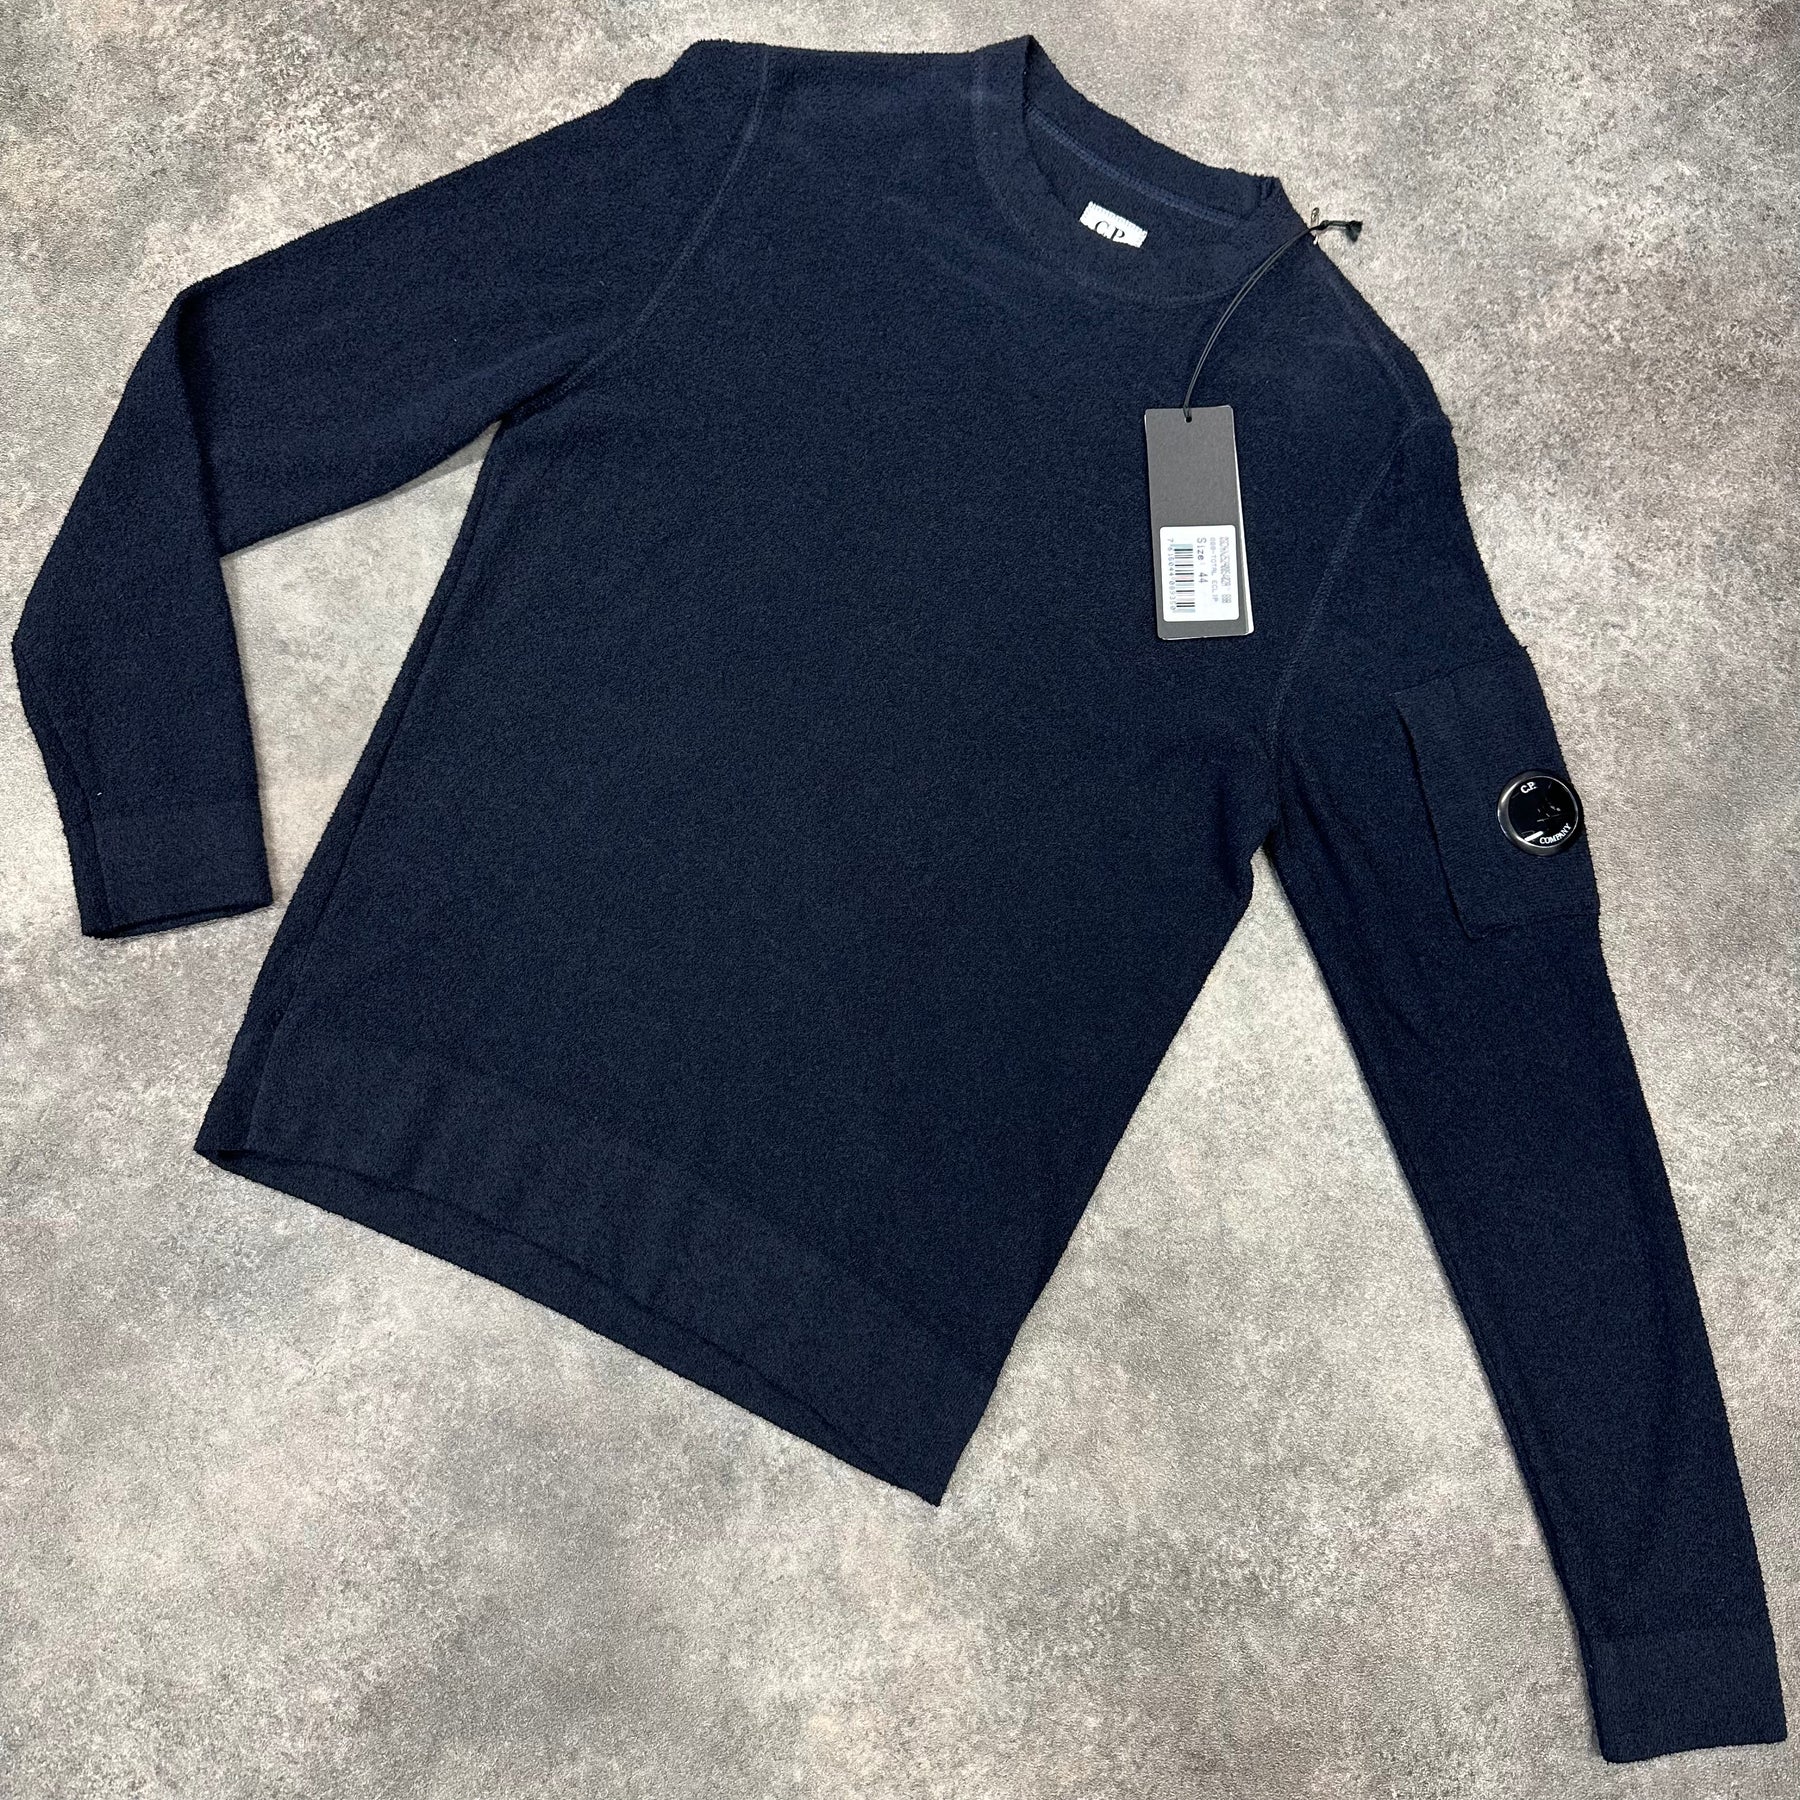 CP COMPANY LENS BANDAGE STYLE SWEATER NAVY BLUE